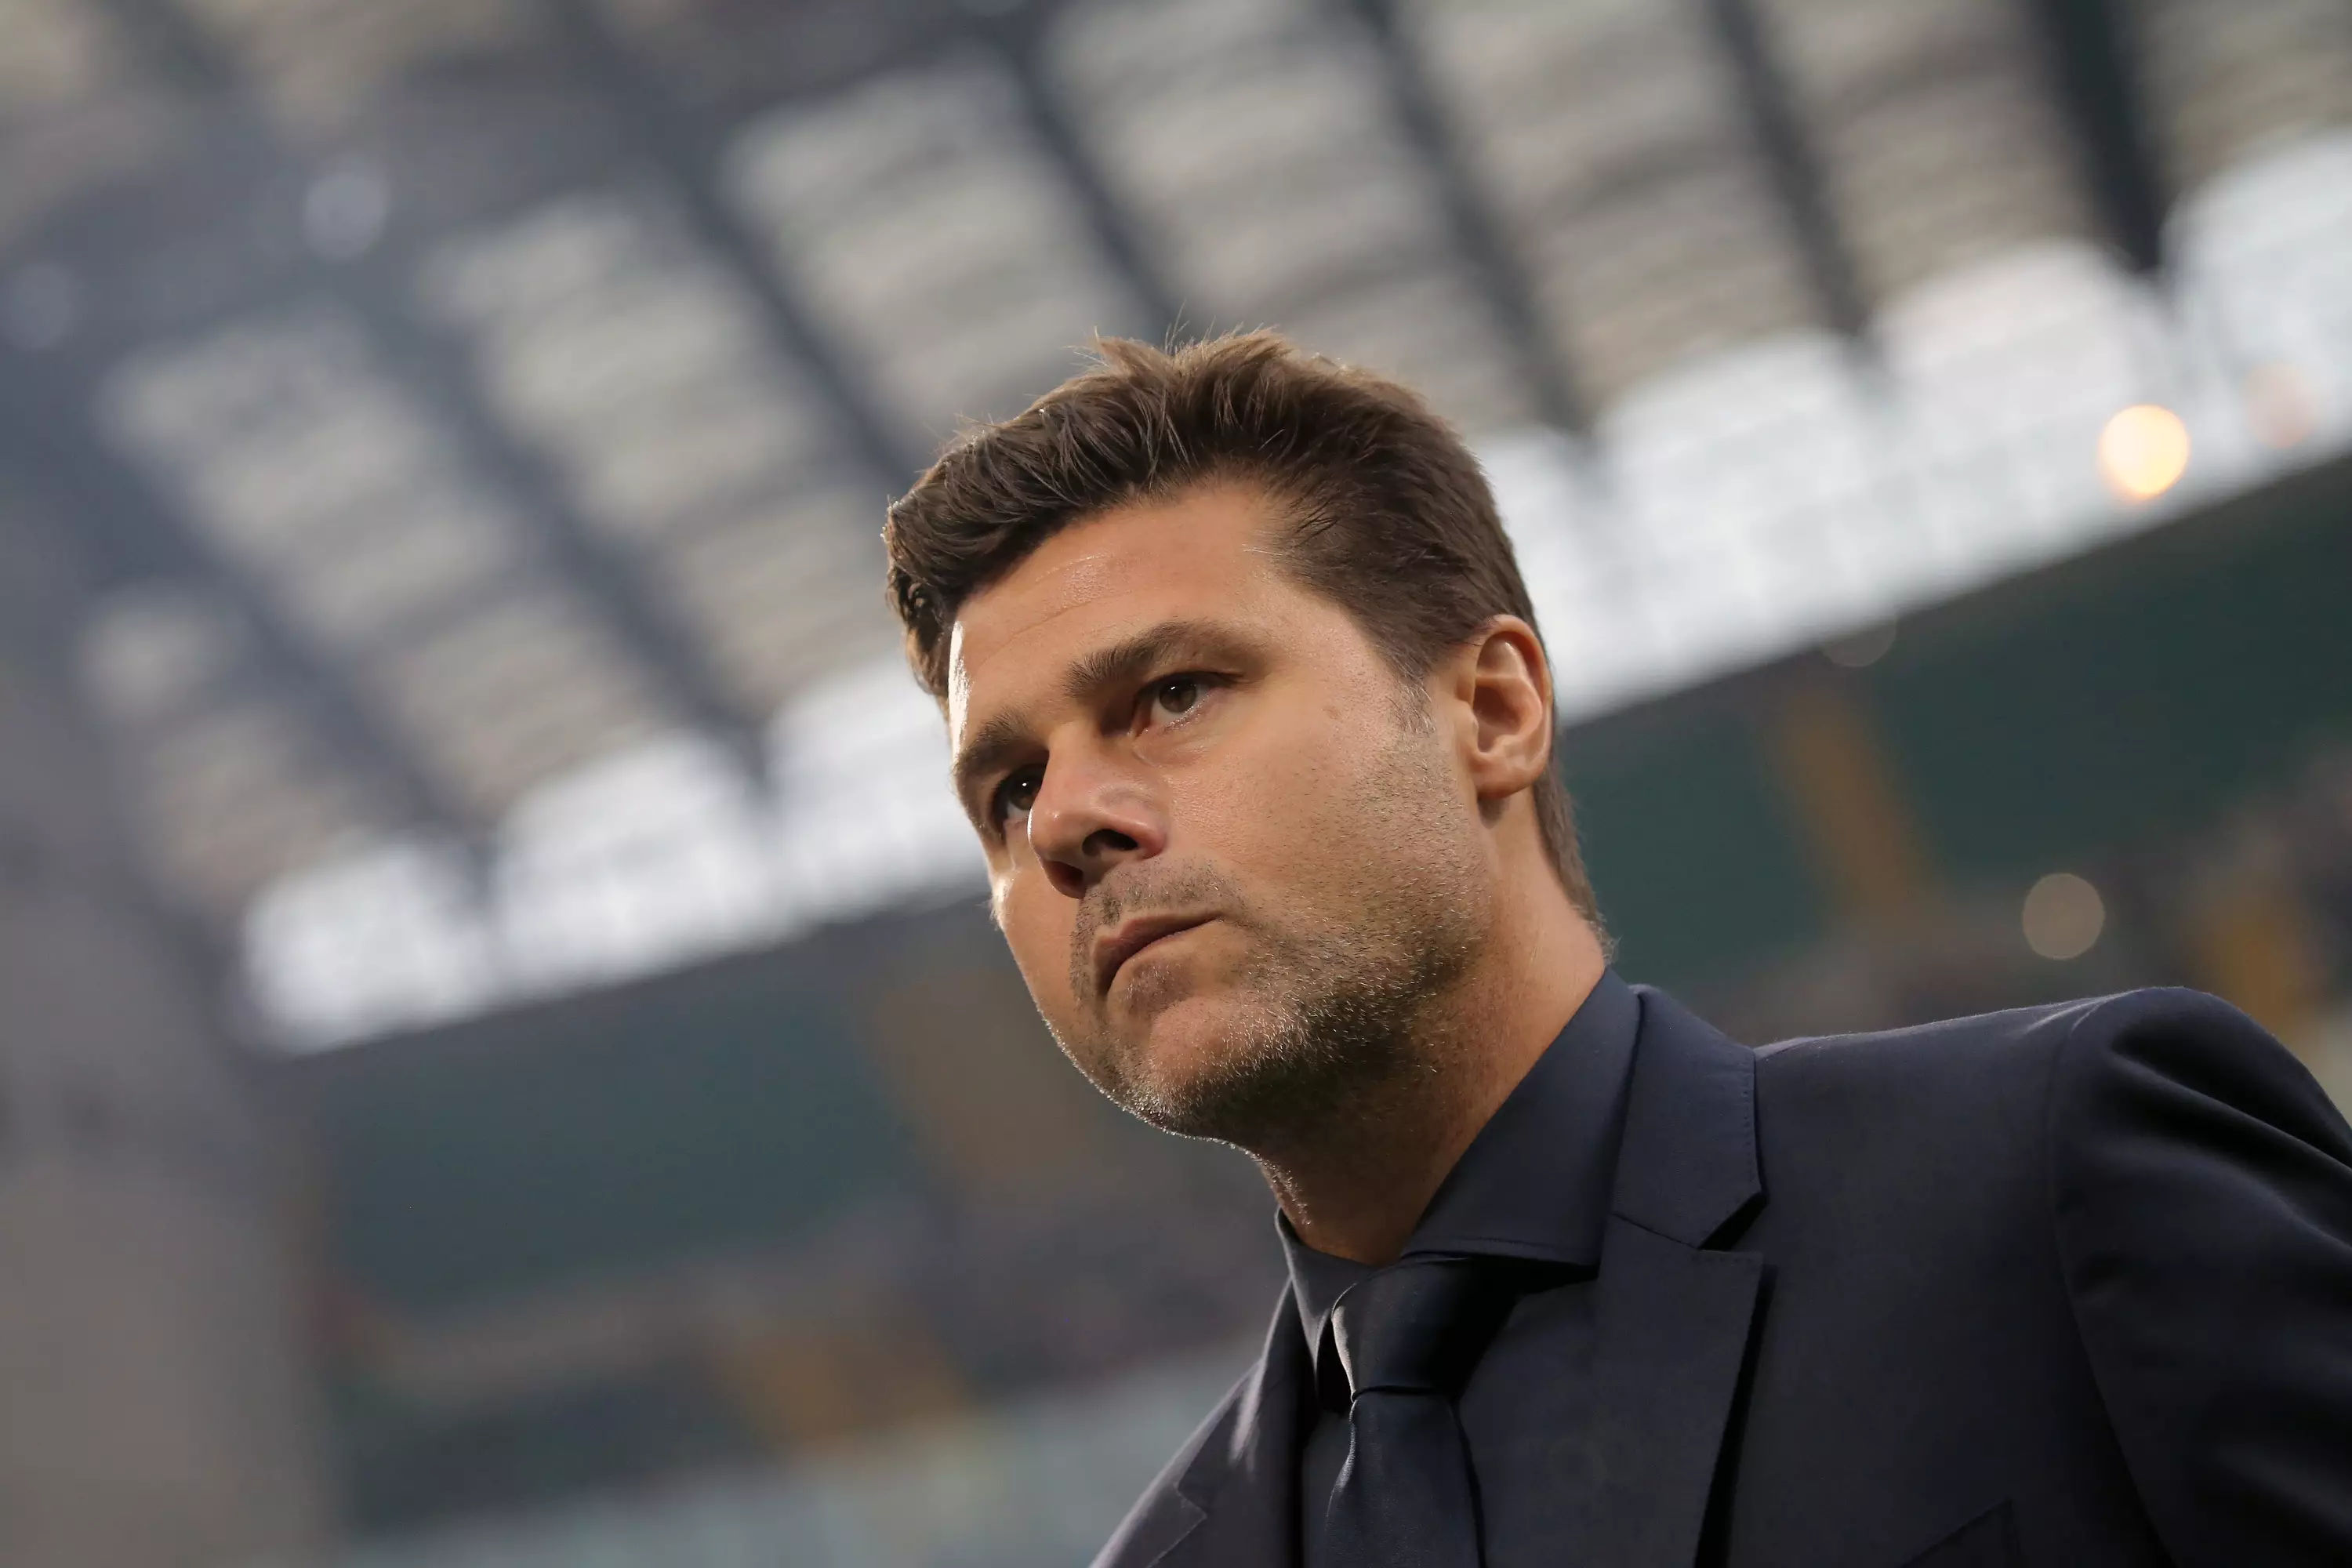 Pochettino's start in this season's Champions League wasn't ideal. Image: PA Image